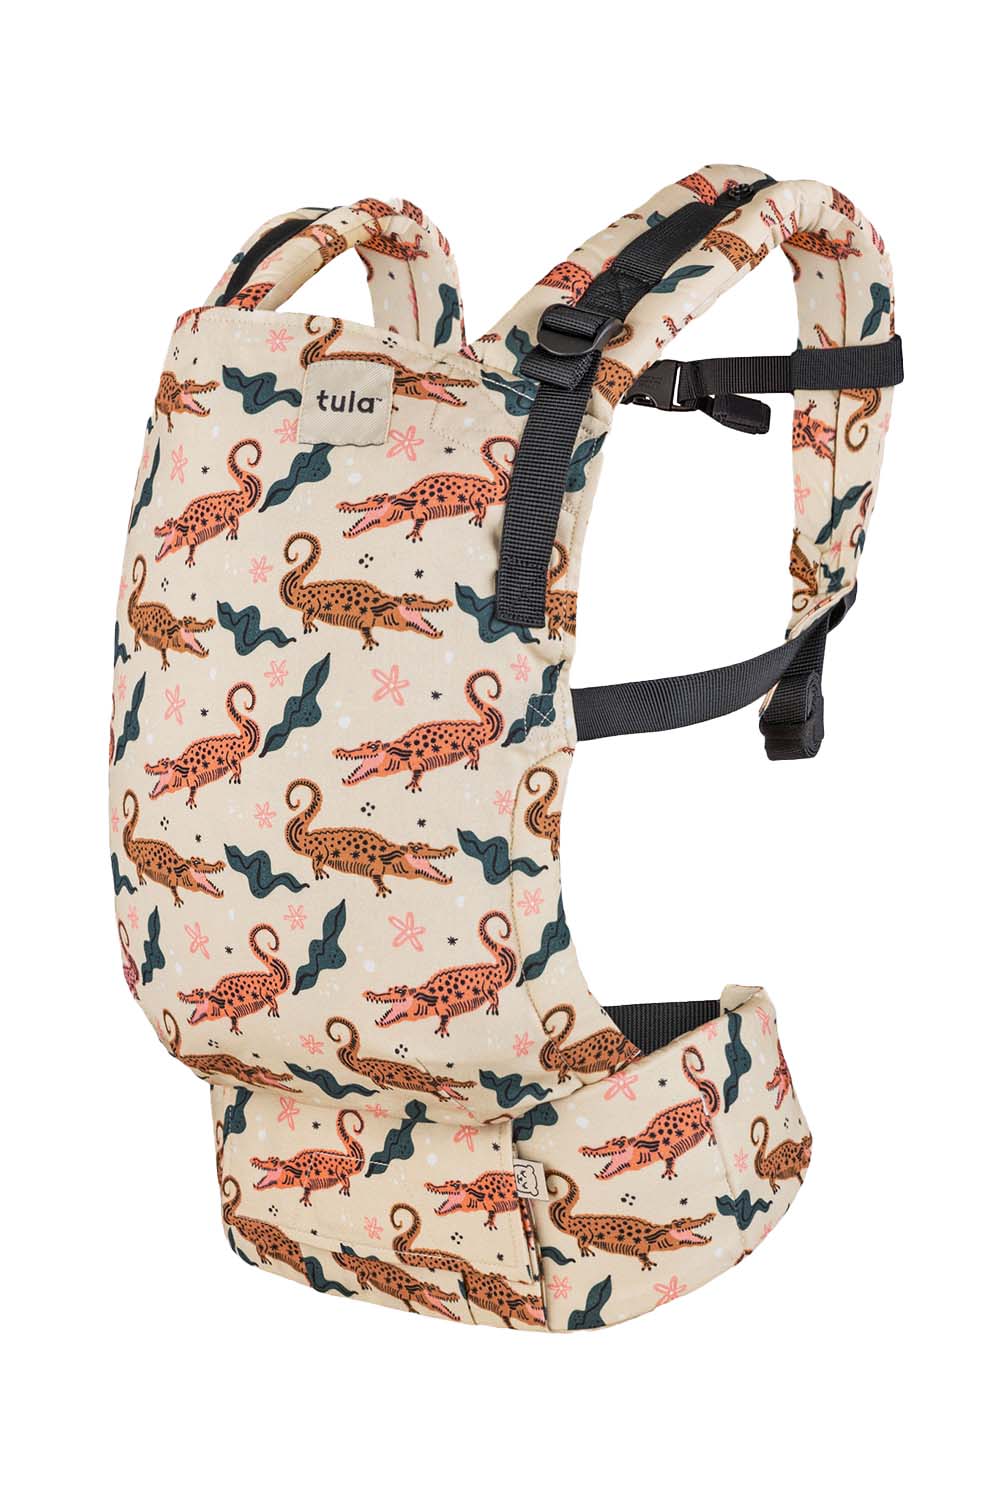 Crocodile Smile - Cotton Free-to-Grow Baby Carrier